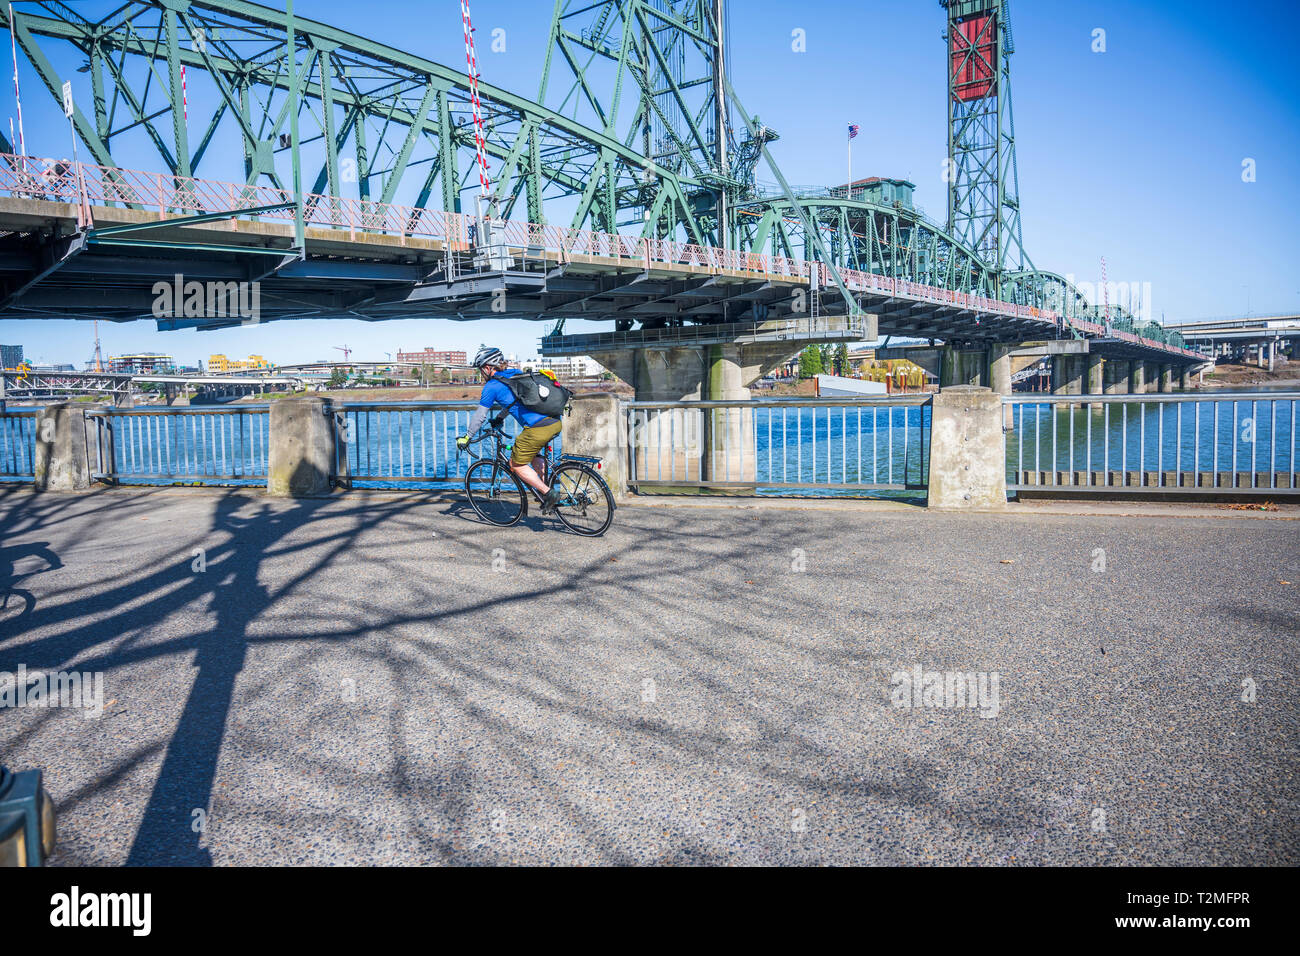 Cyclist pedals a bicycle and rides along the Portland waterfront with bridge, preferring, like most Portland residents, an active healthy lifestyle an Stock Photo